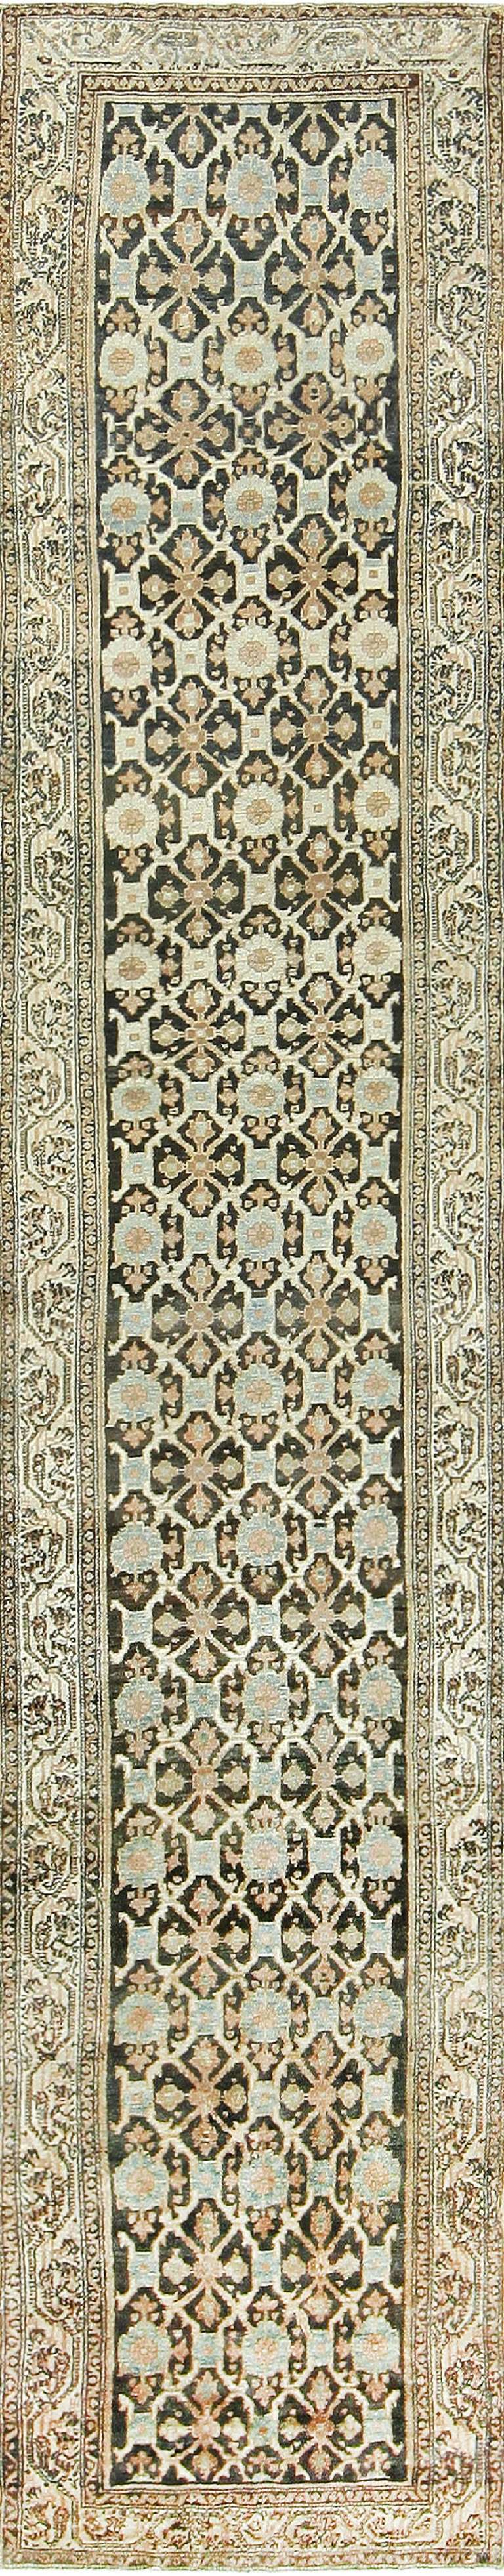 Antique Persian Malayer Rug, Country of Origin: Persia, Circa Date: 1920. Size: 3 ft 2 in x 15 ft 6 in (0.97 m x 4.72 m)

The Malayer rugs of Northern Persia are unique compositions, finely straddling the line between the more ornate carpets of